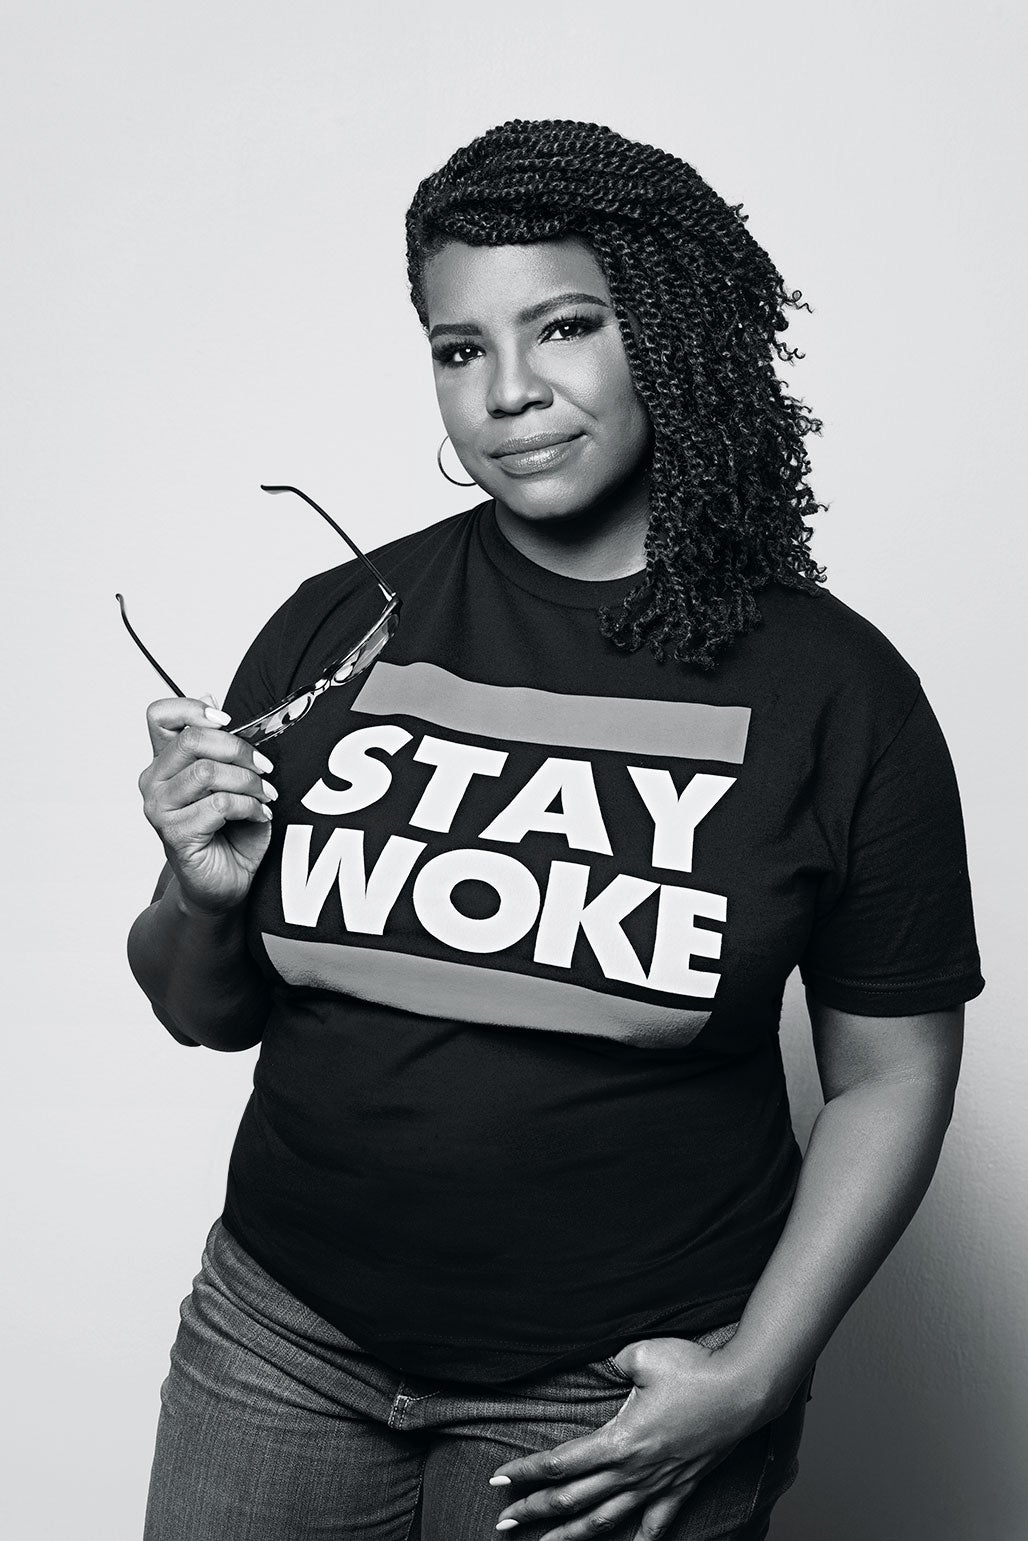 From The Front Lines To Hollywood: These Influential Women Share What It Means To Be 'Woke'
